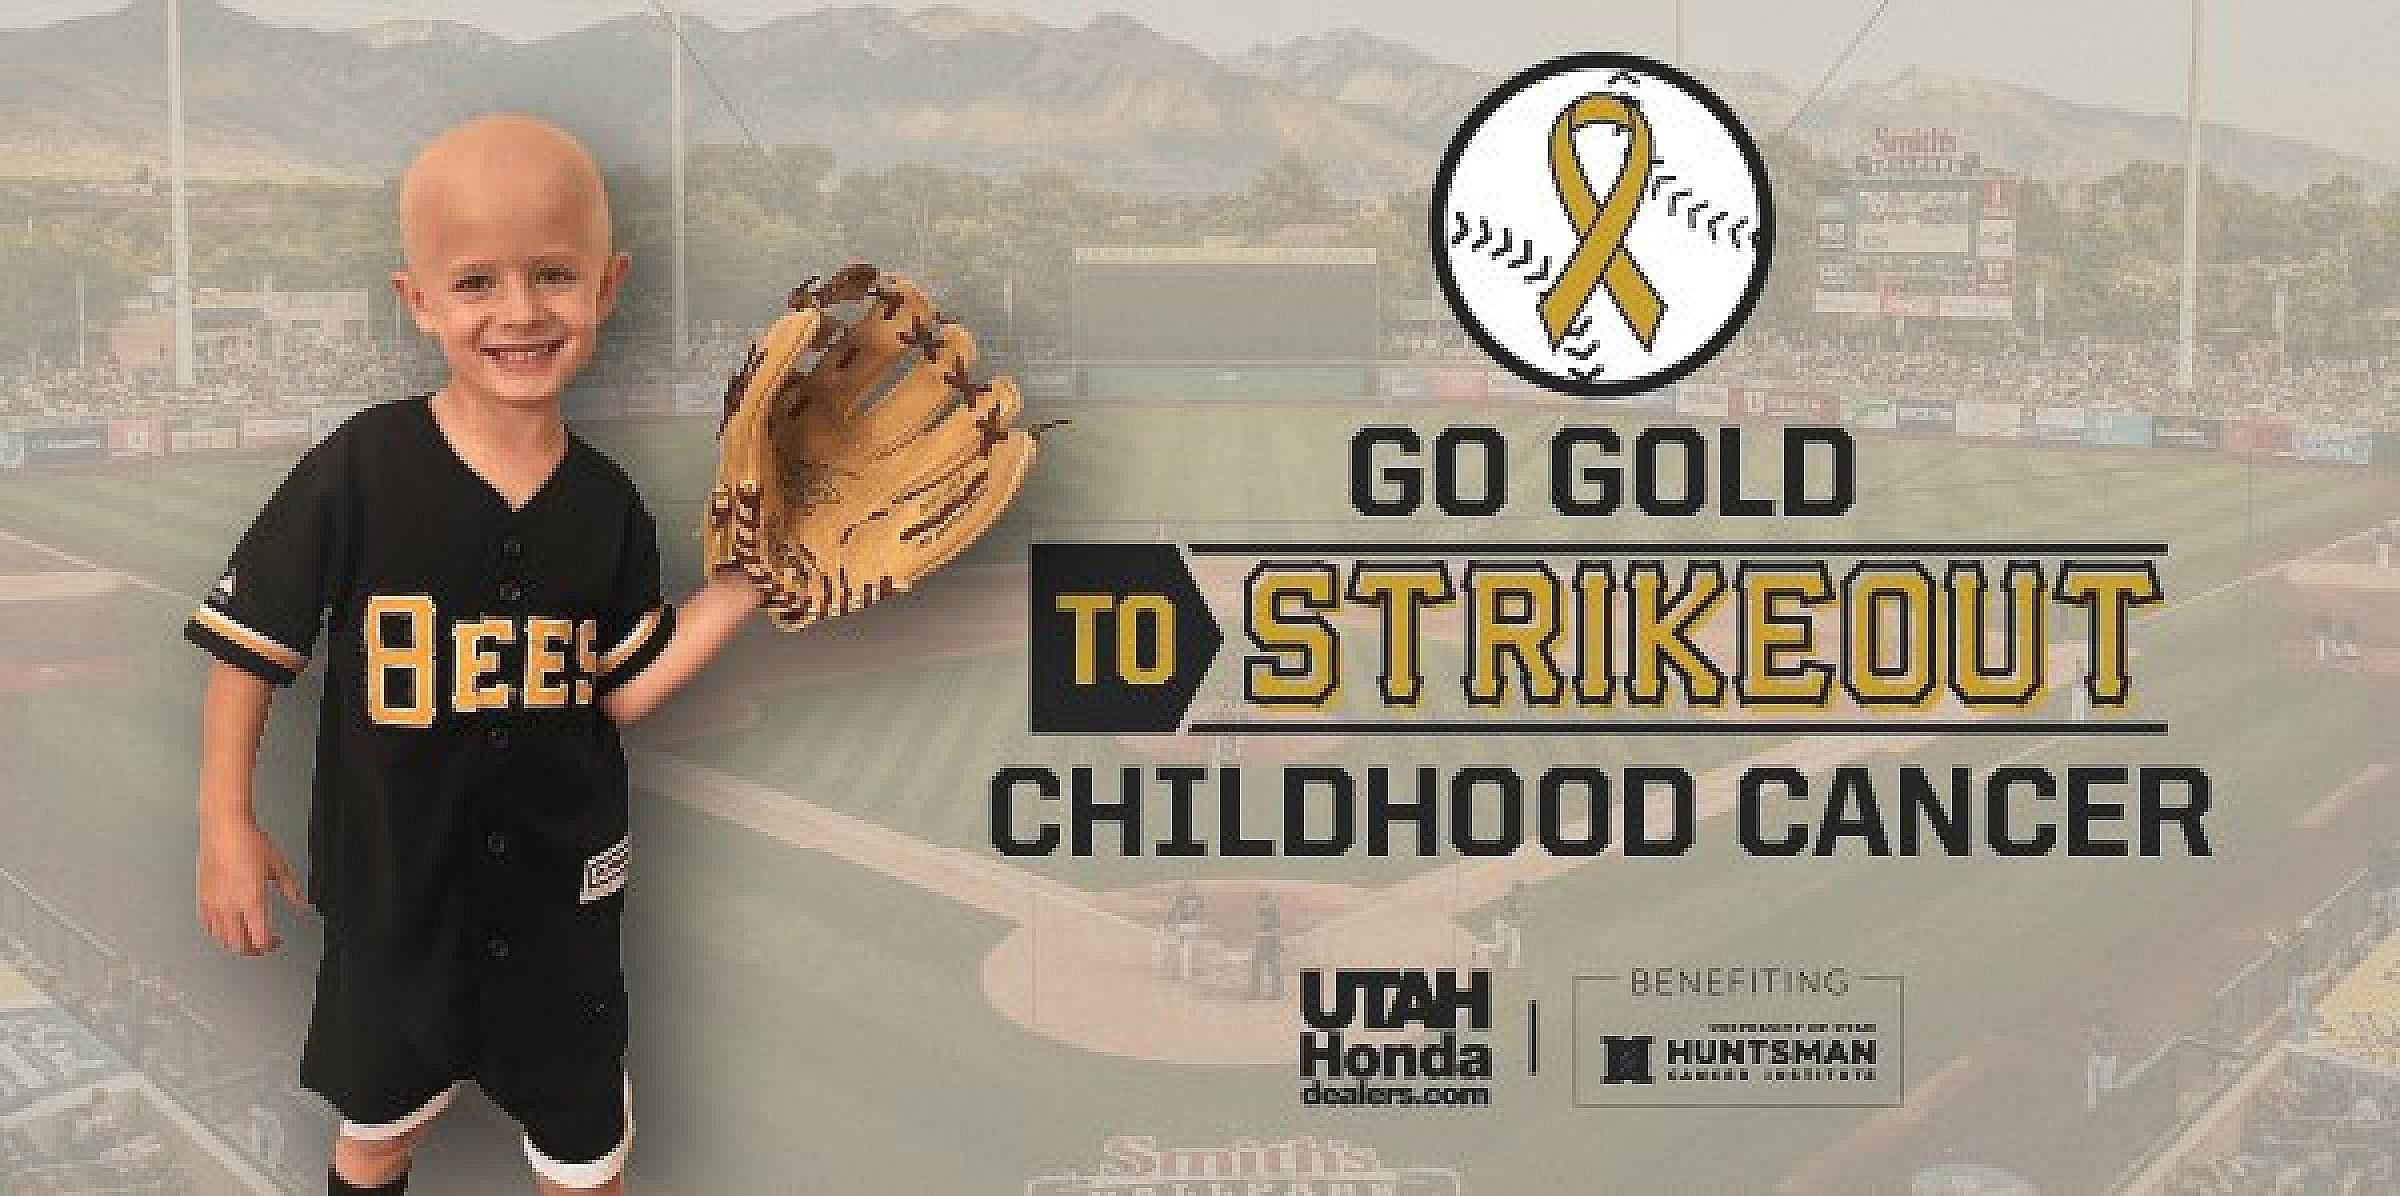 Marshall wearing a catcher's mitt in front of an ad for Go Gold to Strikeout Childhood Cancer